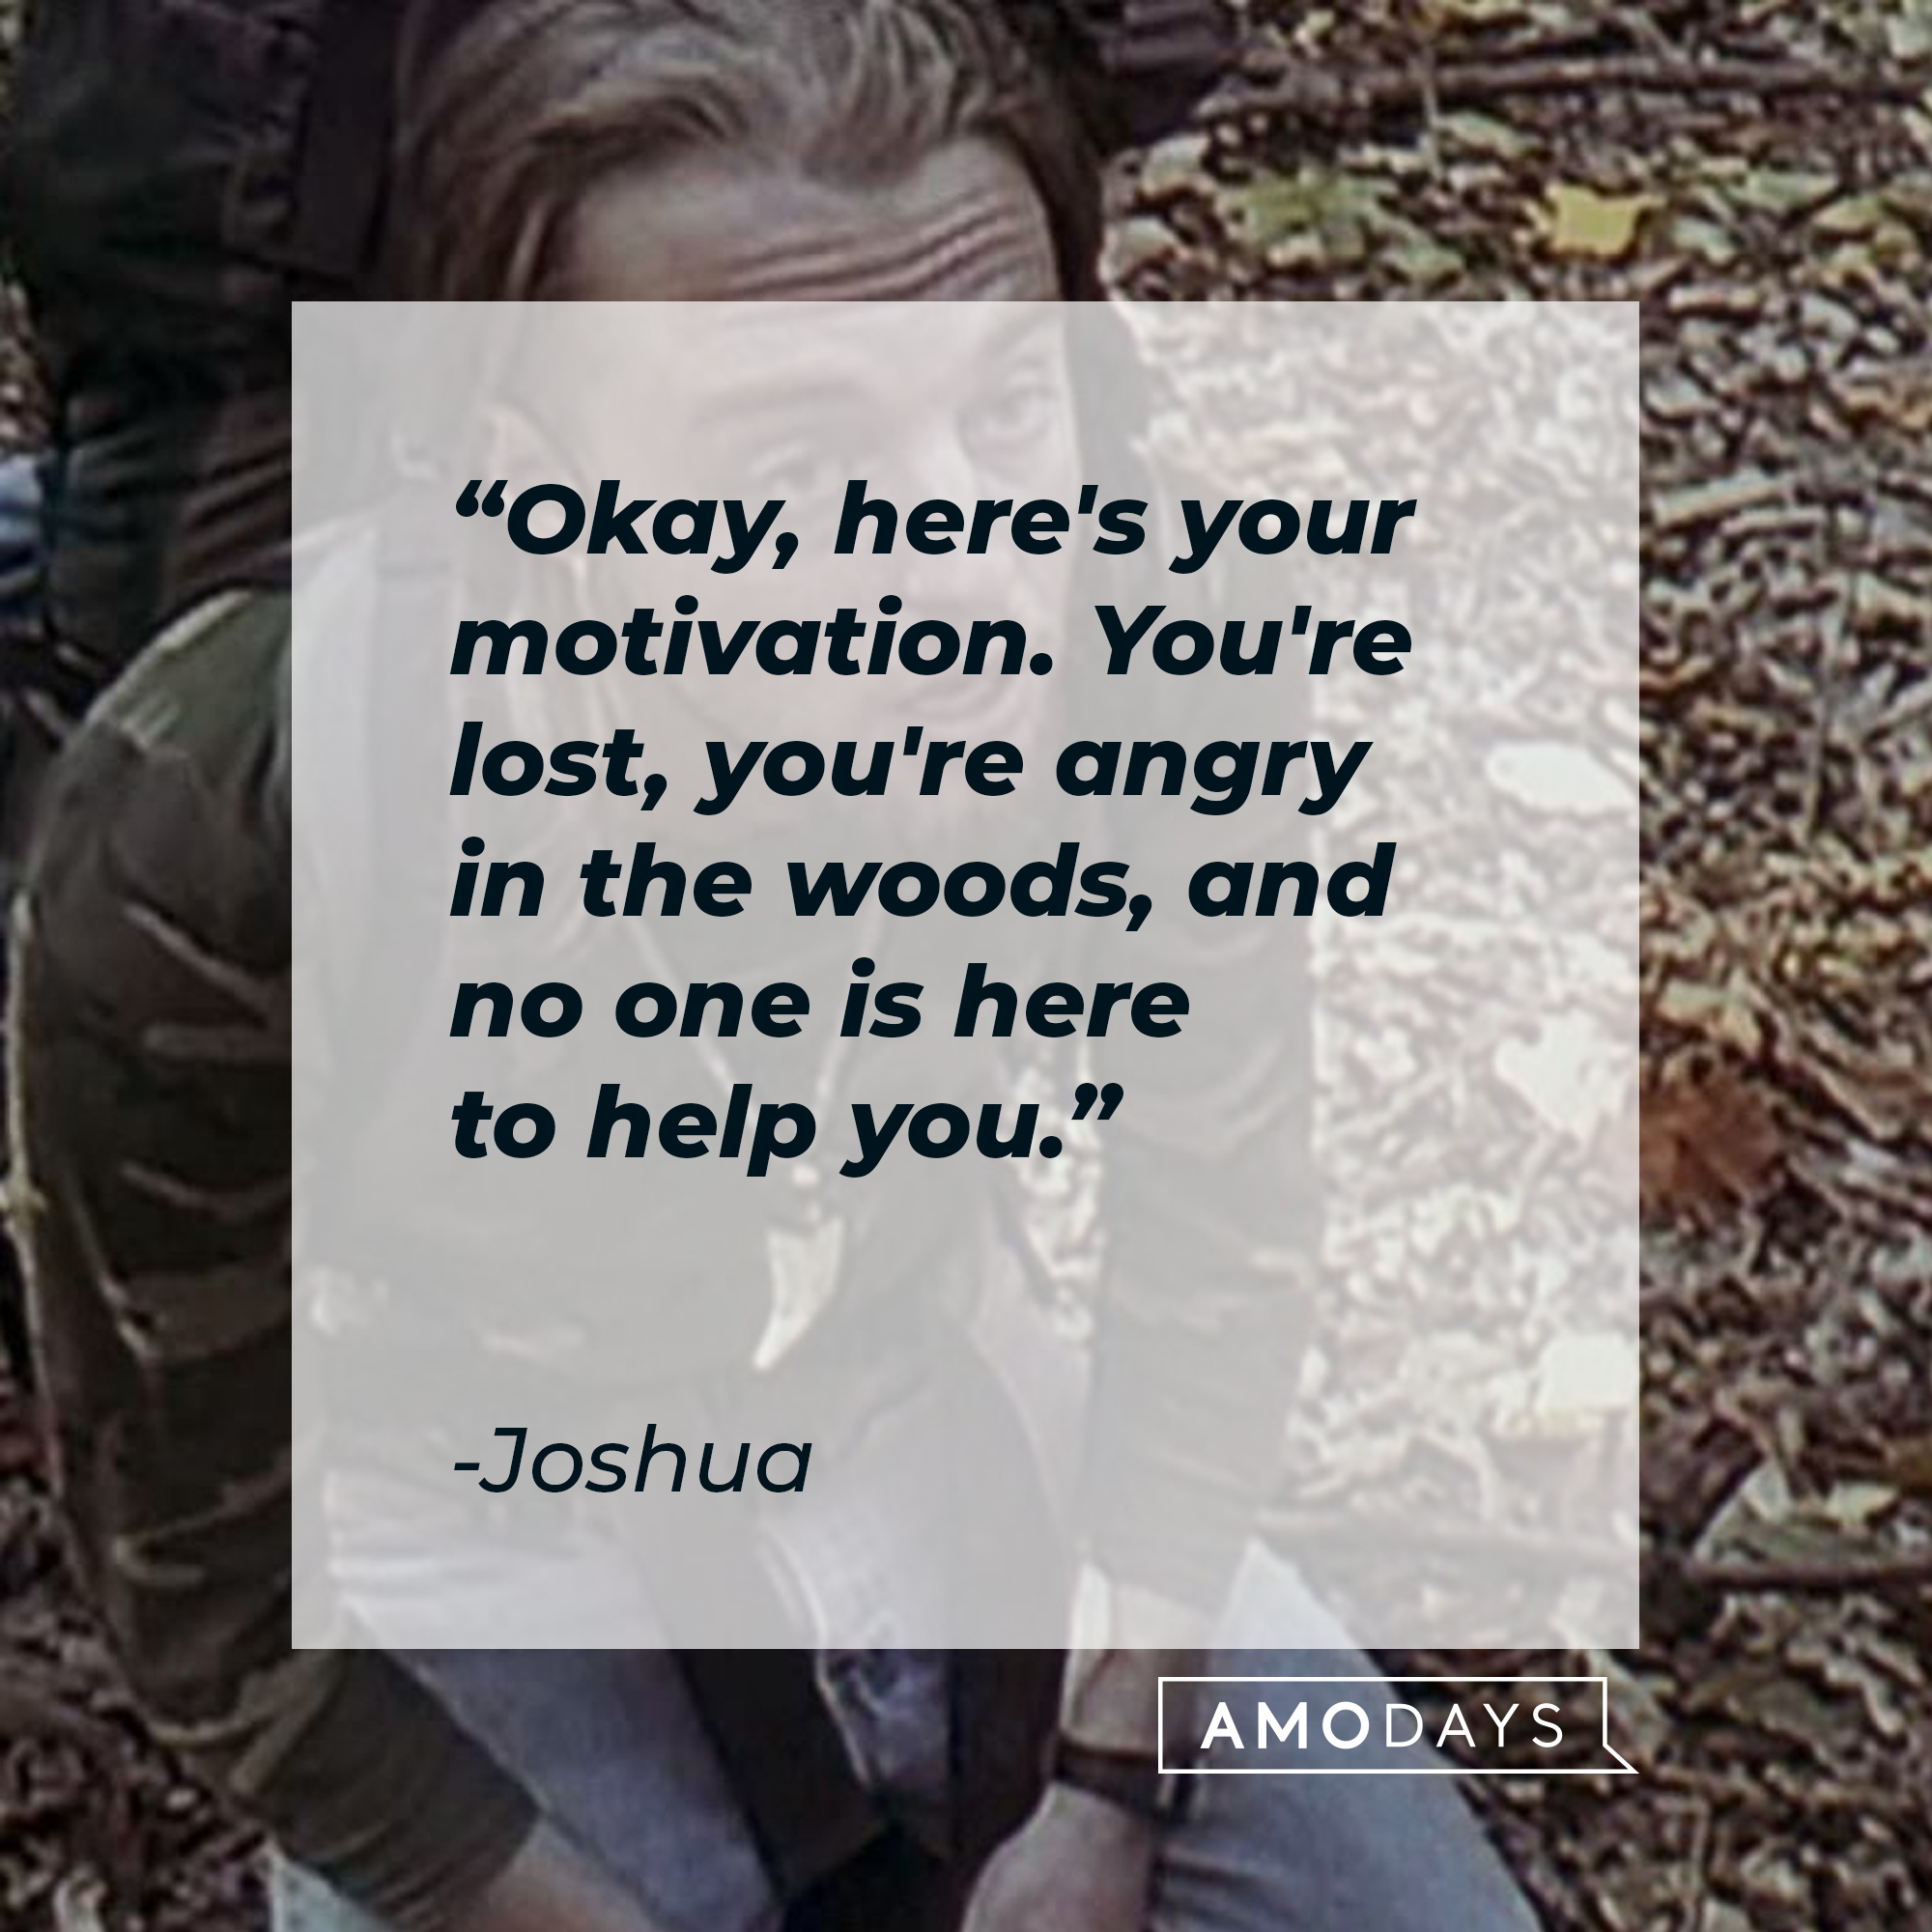 Joshua's quote: “Okay, here's your motivation. You're lost, you're angry in the woods, and no one is here to help you.” | Source: facebook.com/blairwitchmovie